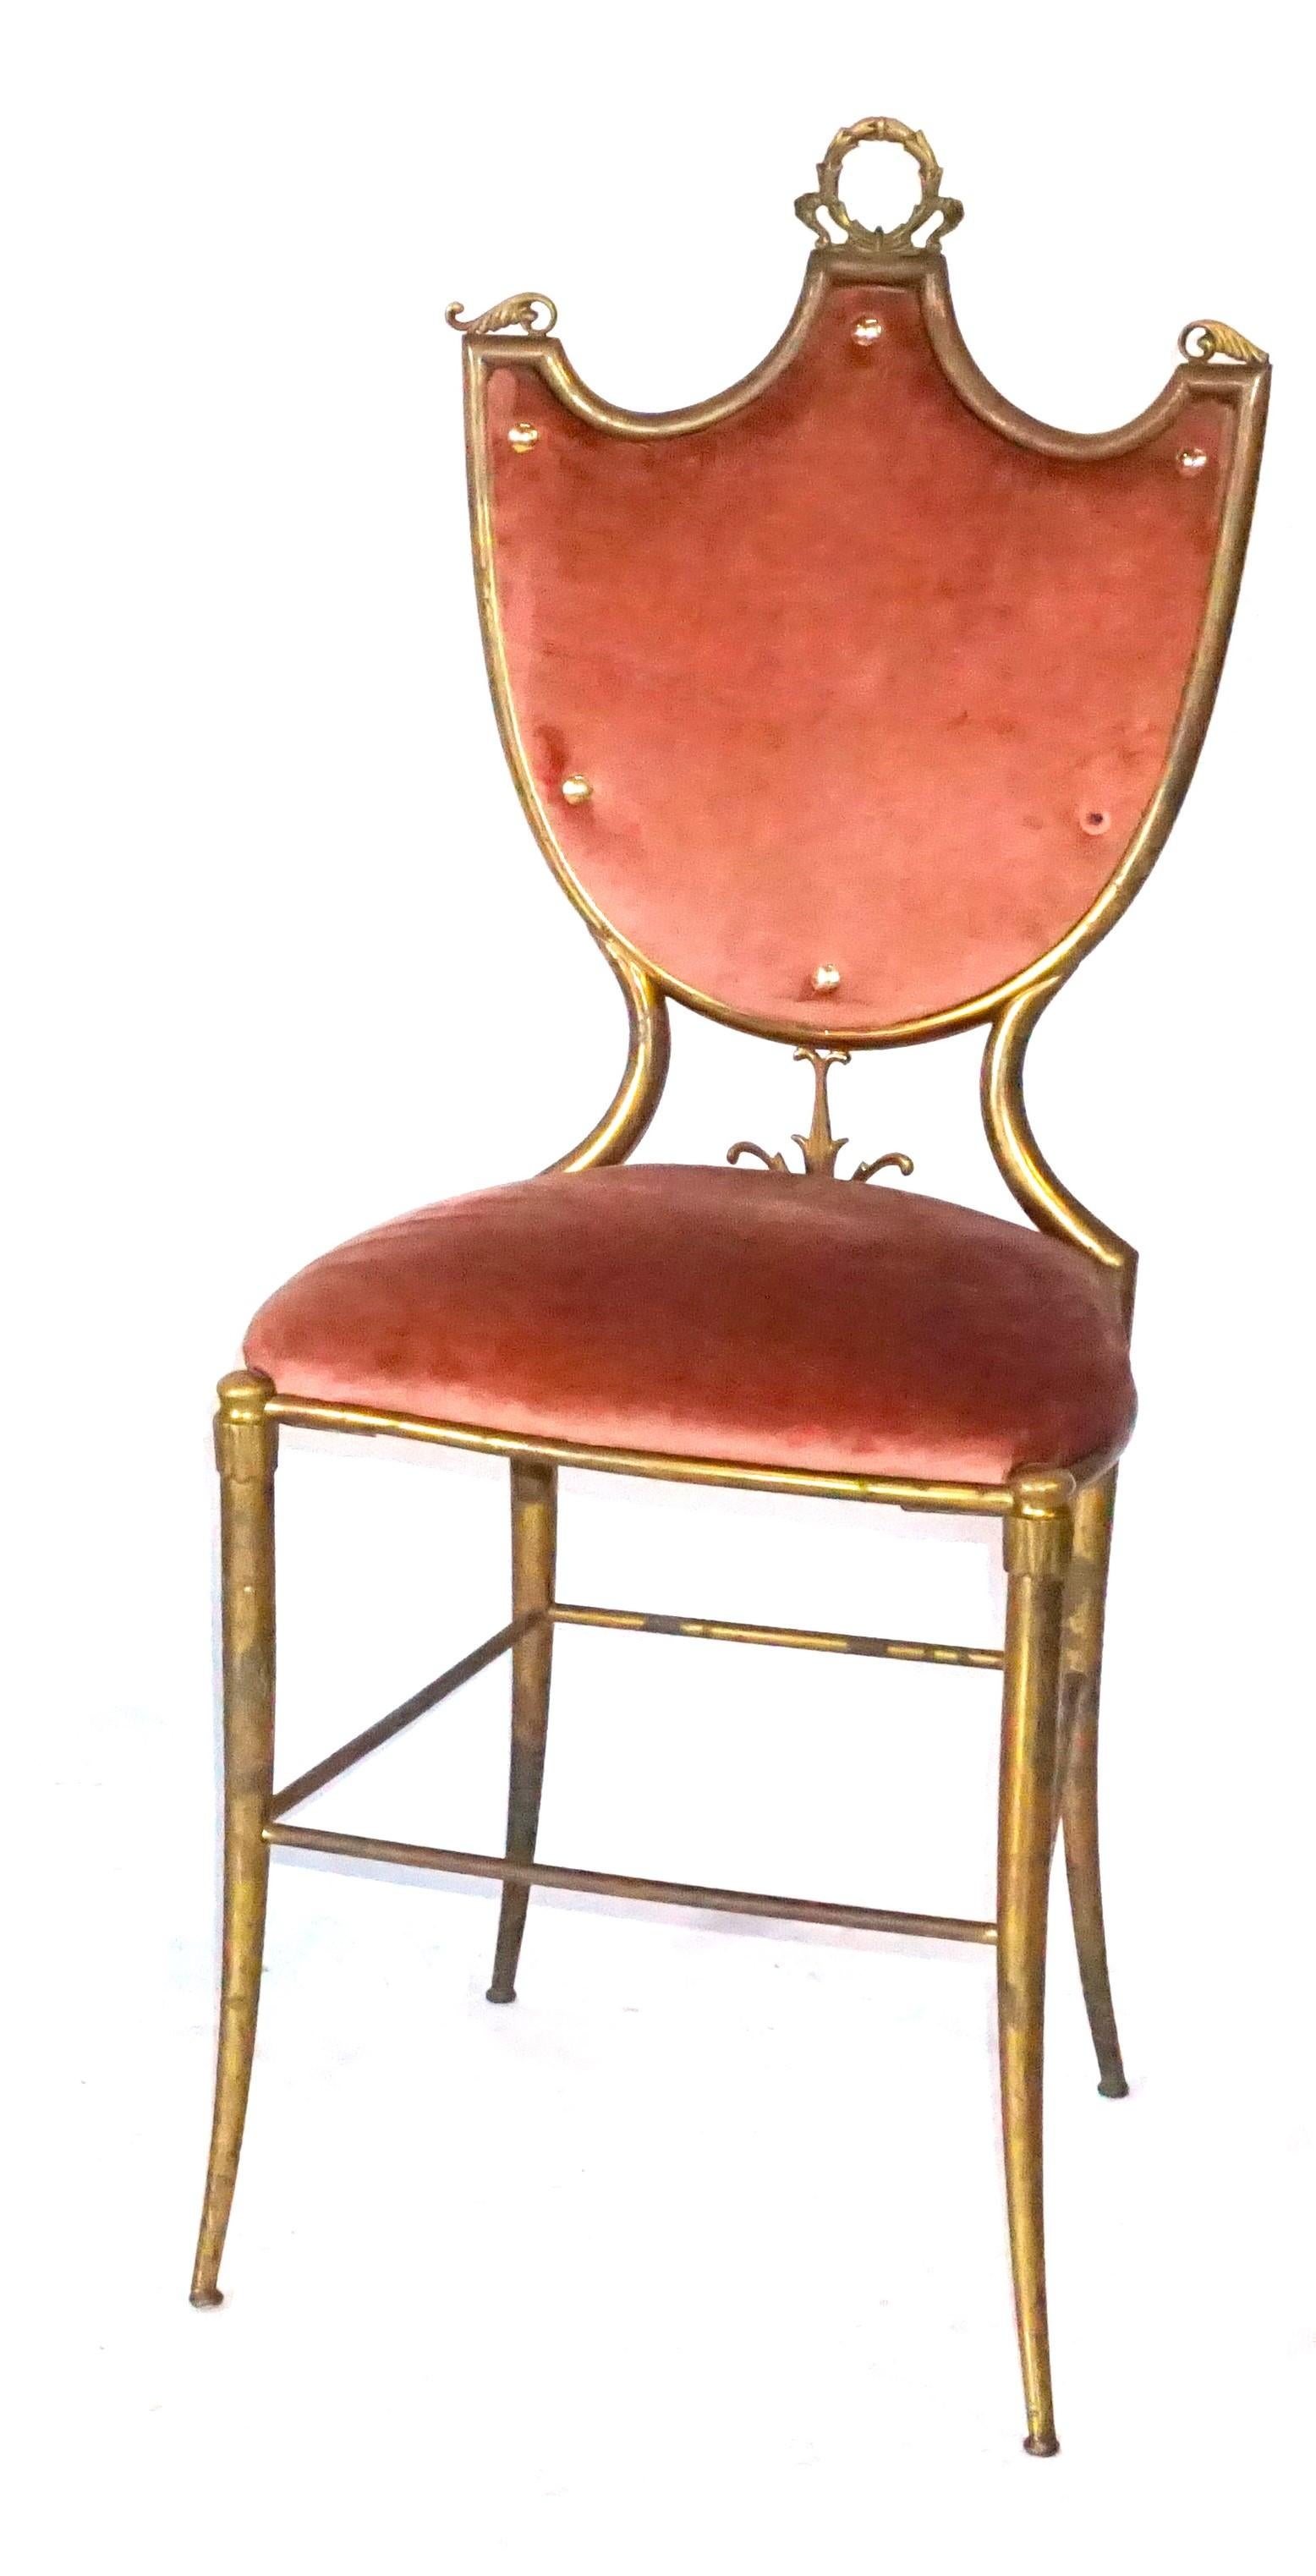 A vintage pair of Italian neoclassical style dining chairs made of bronze with velvet upholstery, in good condition. The Art Deco side chairs are enhanced by detailed backrest design, standing on four curved legs. Wear consistent with age and use,